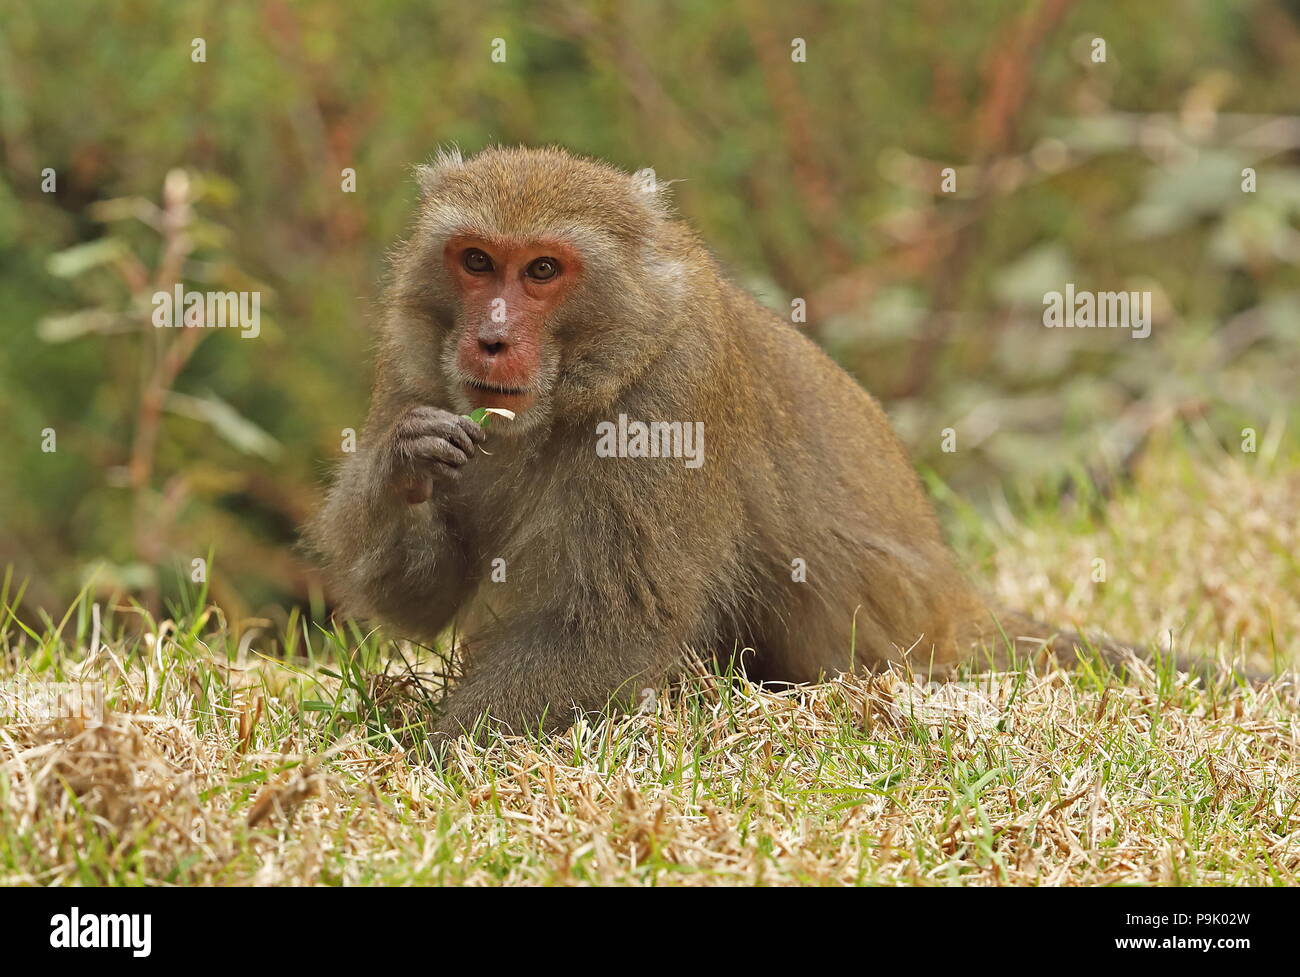 Macaques (Macaca cyclopis taïwanais) adulte sitting on grass eatingleaf Dasyueshan National Forest, avril Taiwan Banque D'Images